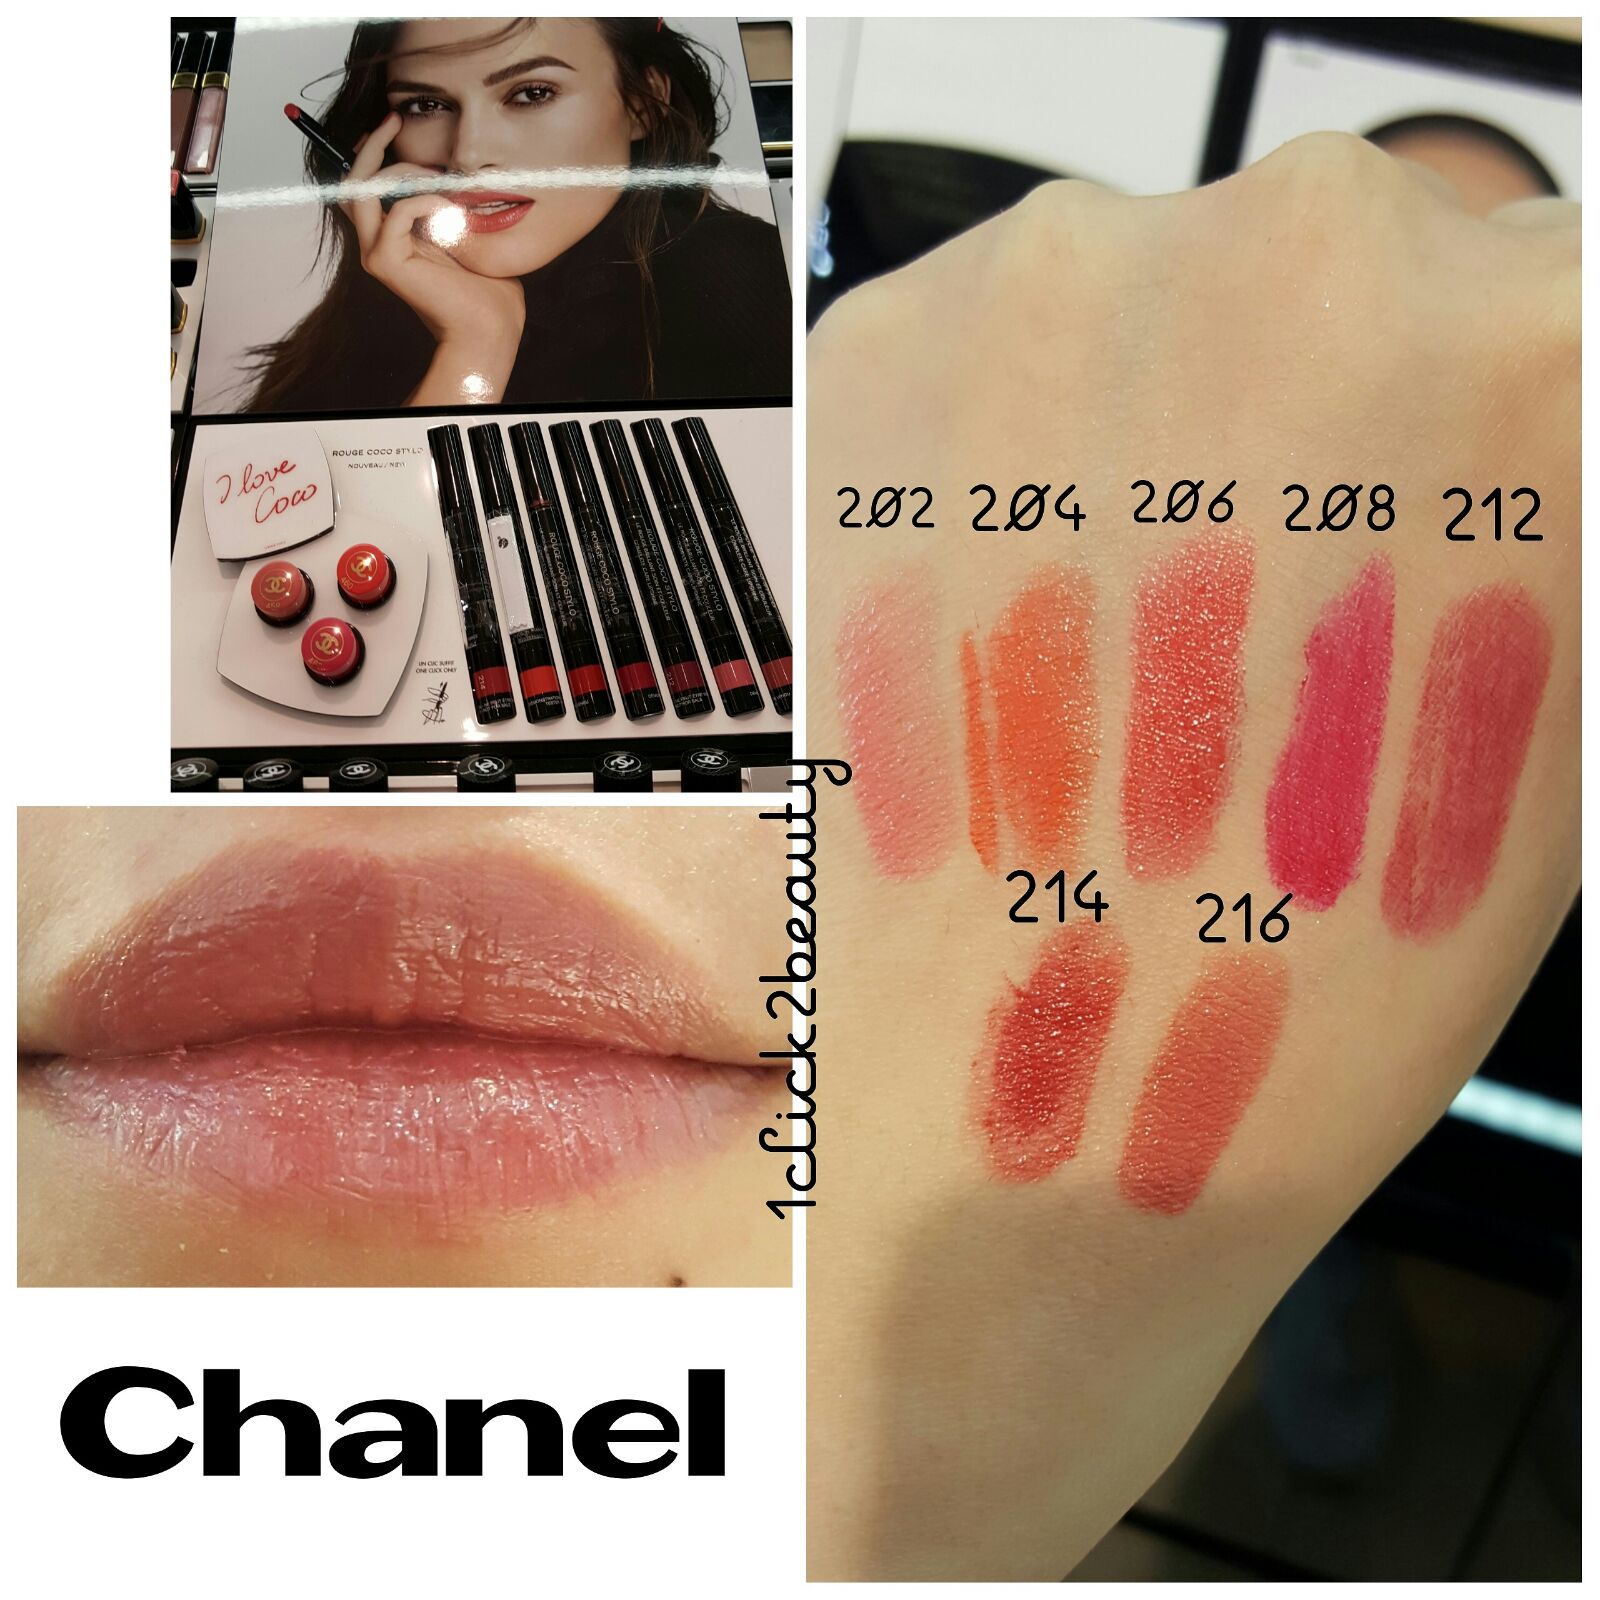 Sneak Peek: Chanel Rouge Coco Stylos Photos & Swatches